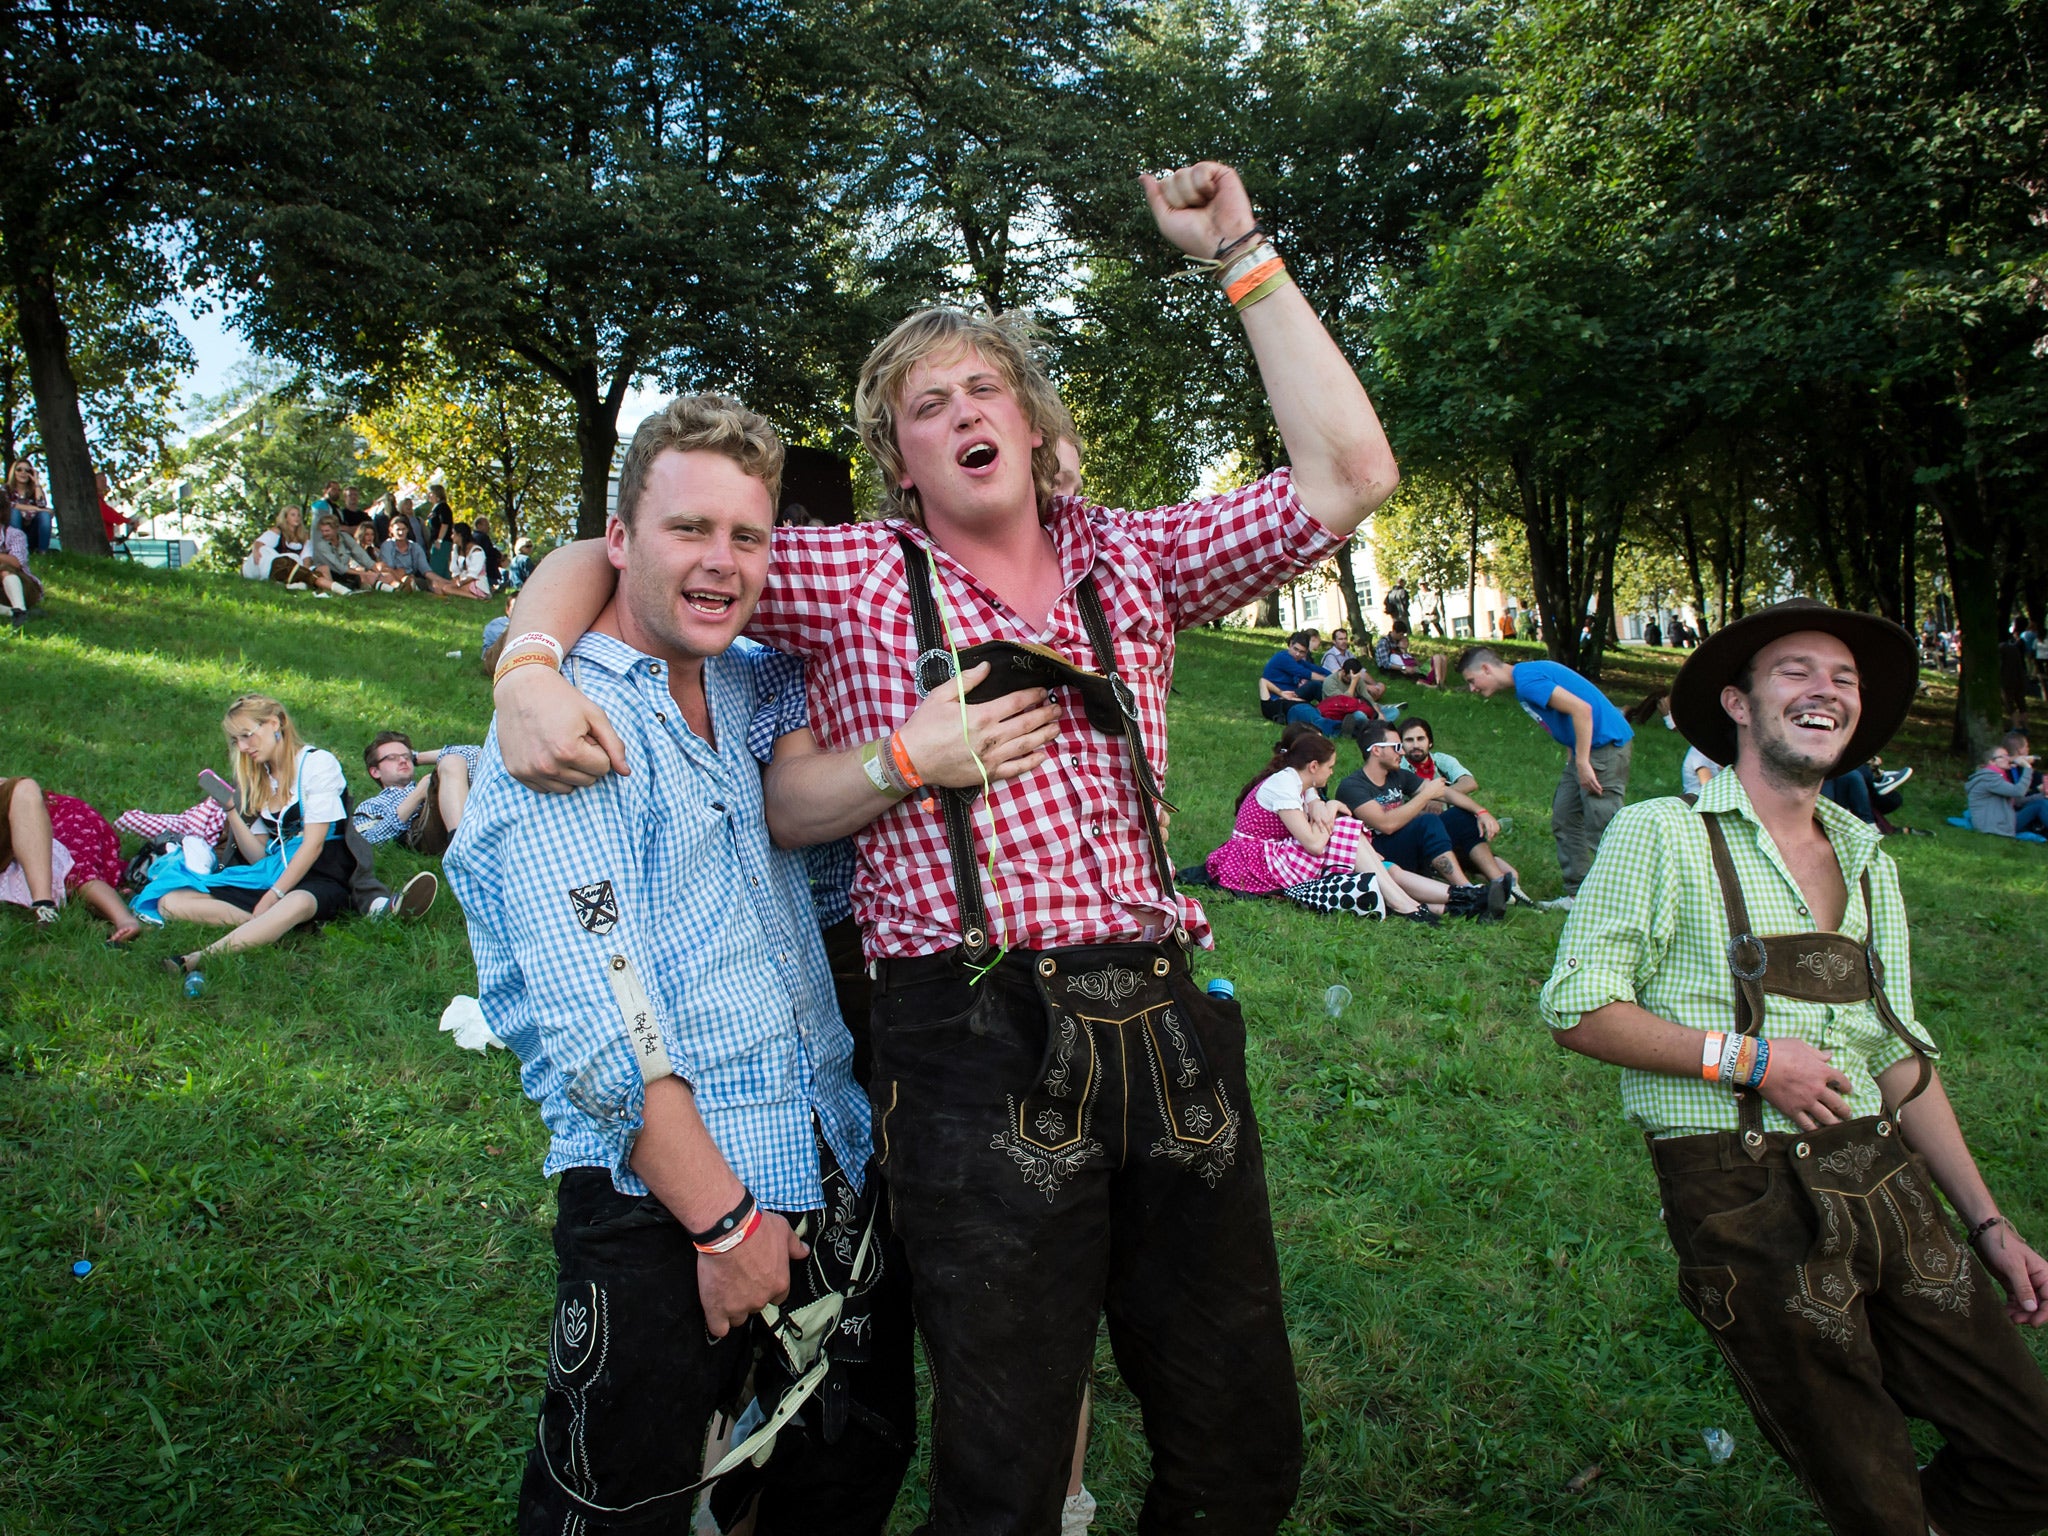 Drunken or tired visitors in traditional bavarian clothes take a rest during the opening day of the 2014 Oktoberfest